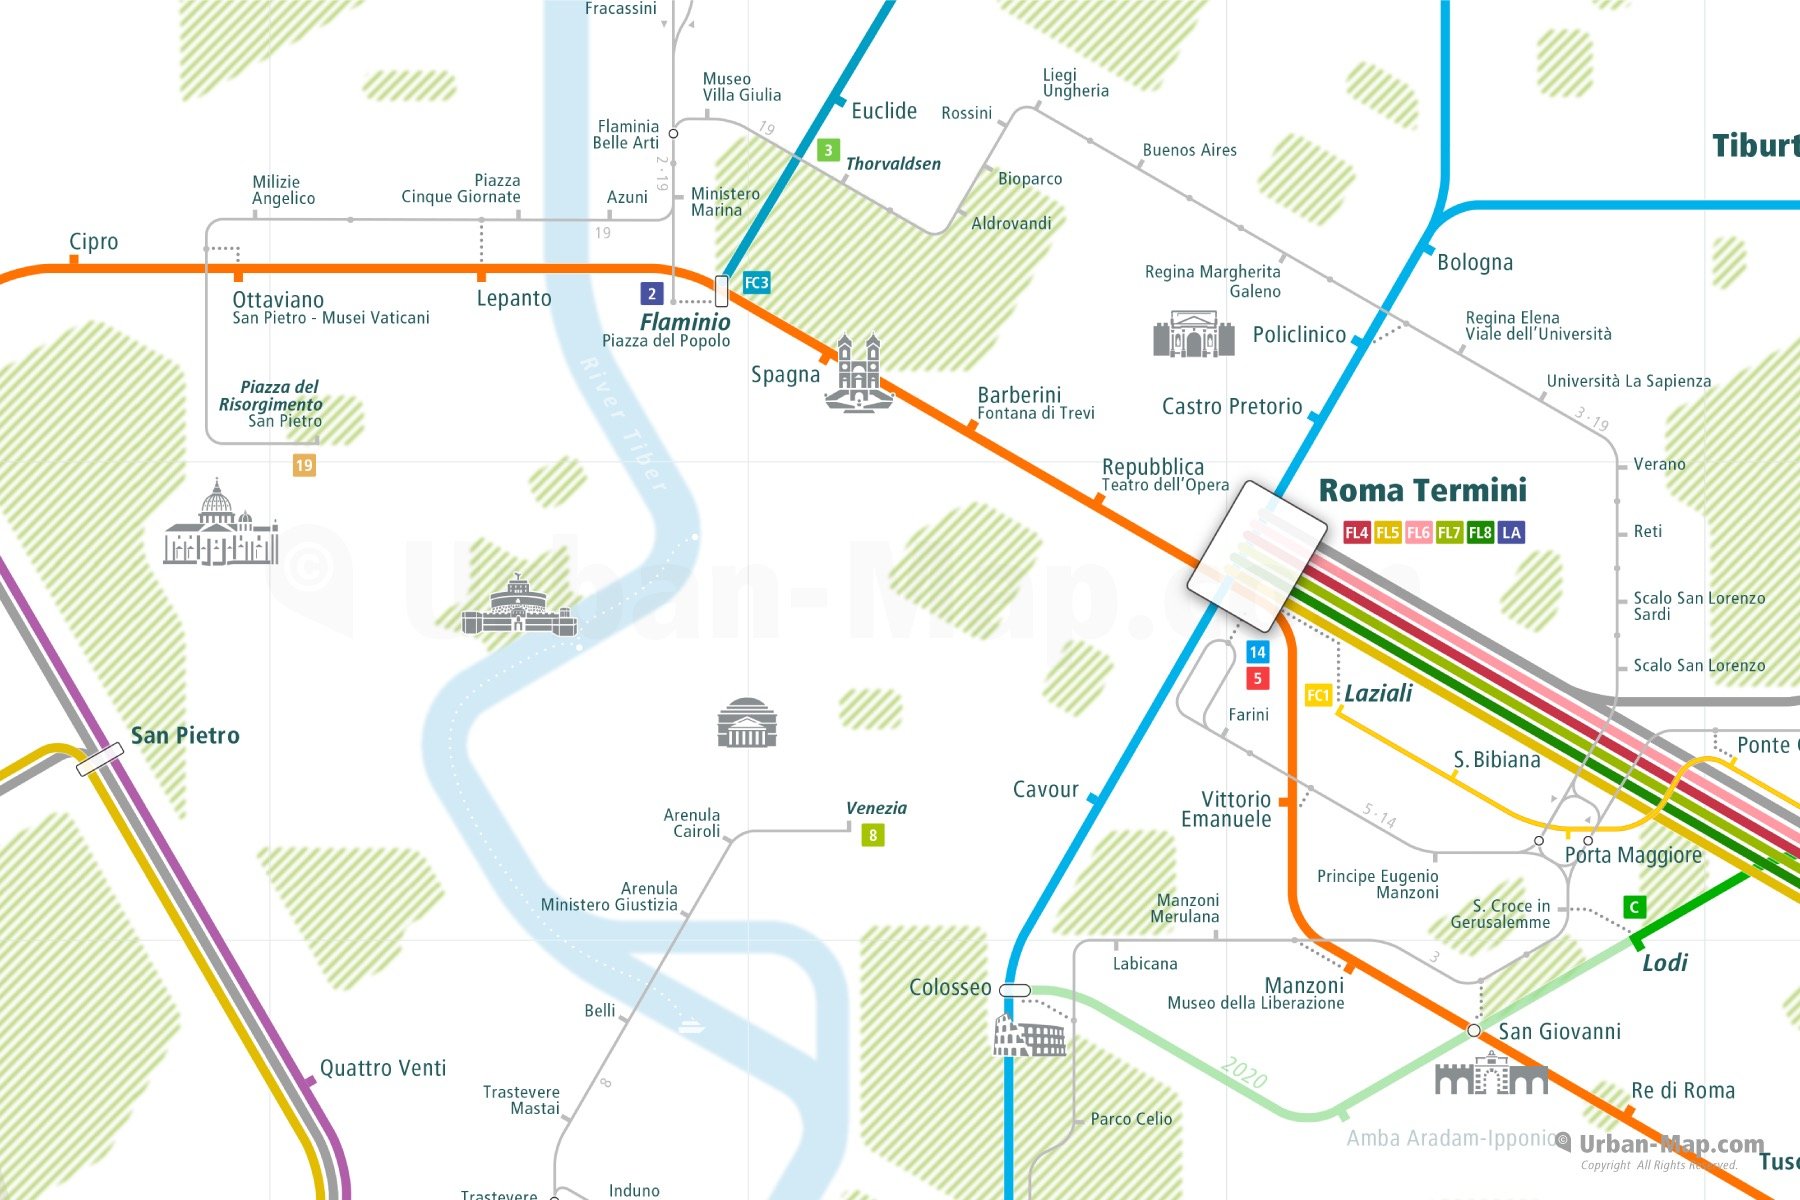 Rome City Rail Map shows the train and public transportation routes of - Close-Up